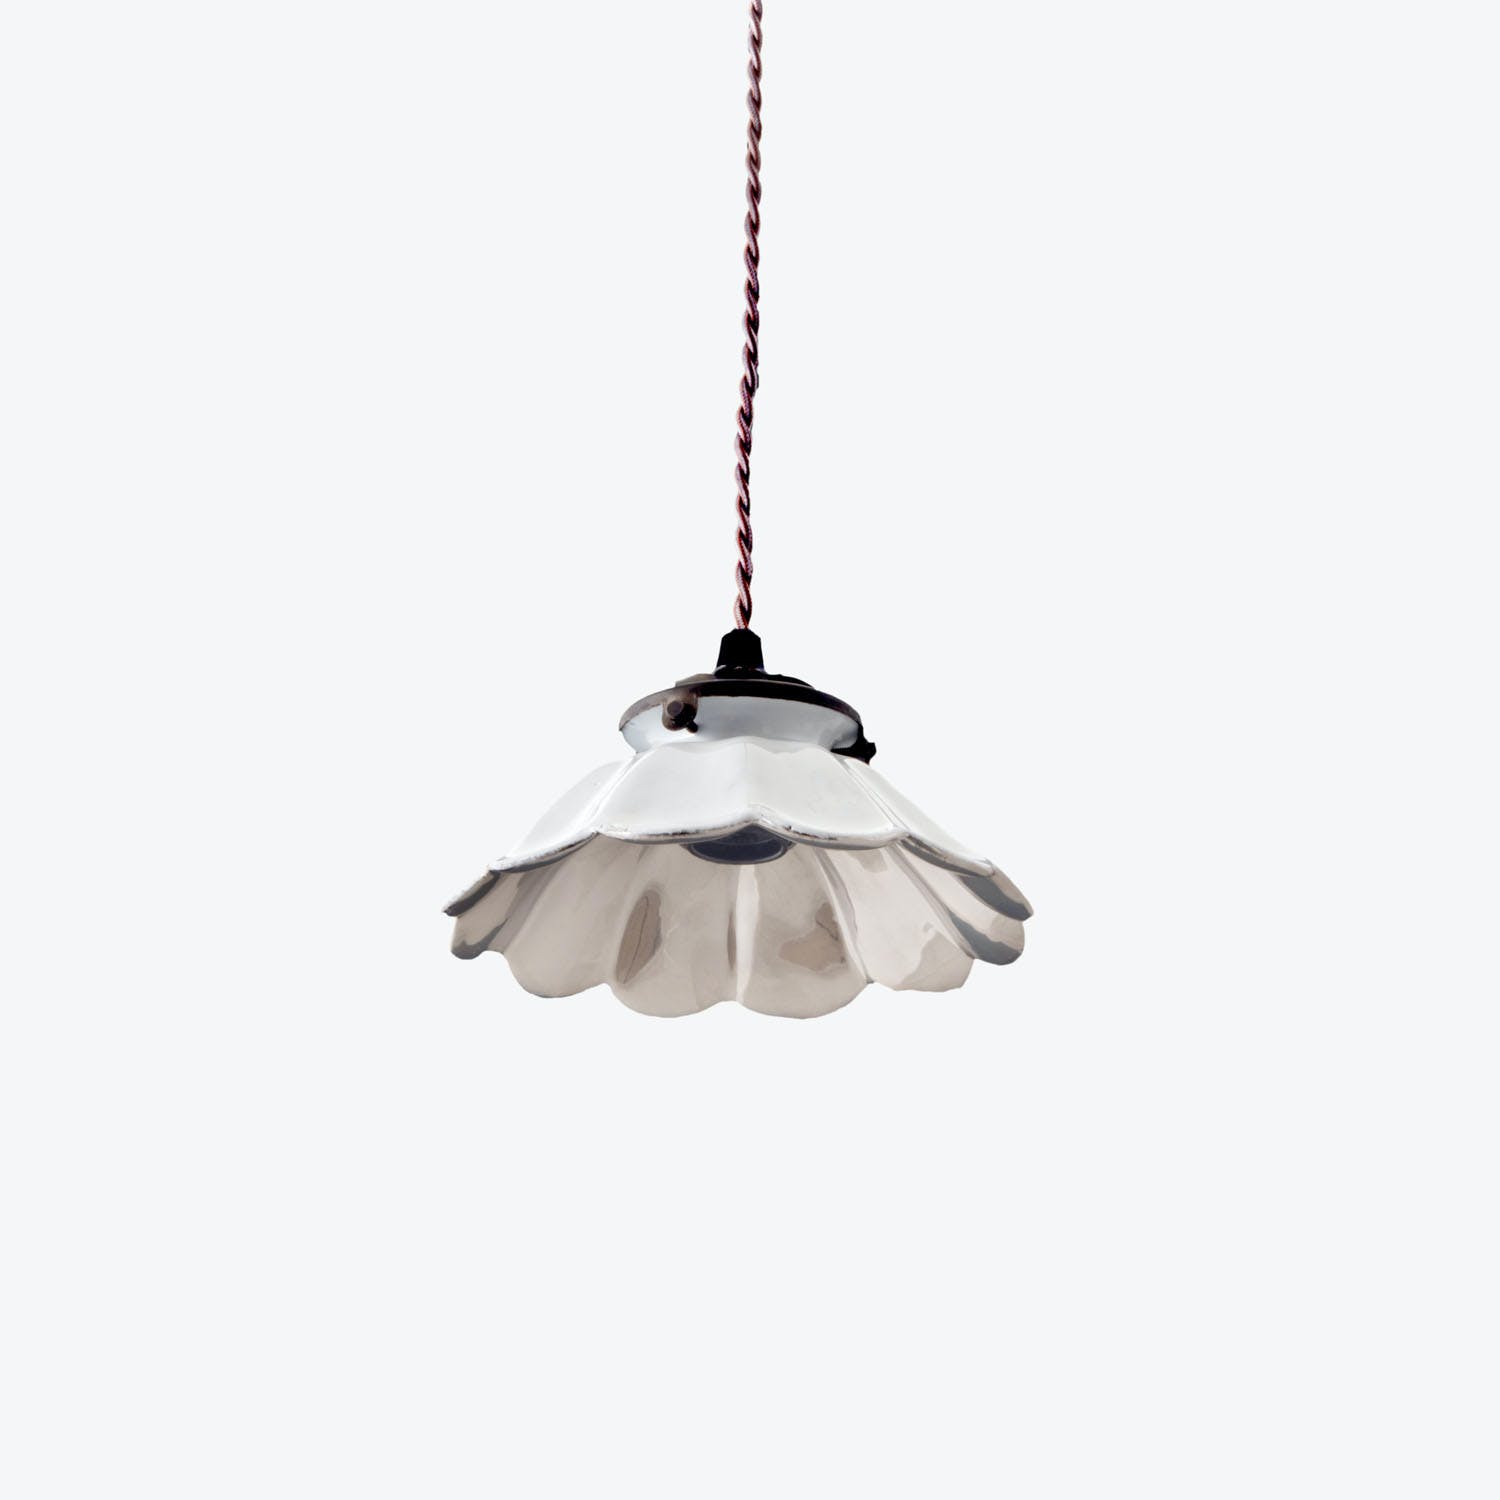 Floral-inspired pendant light with twisted fabric cable illuminates the room.